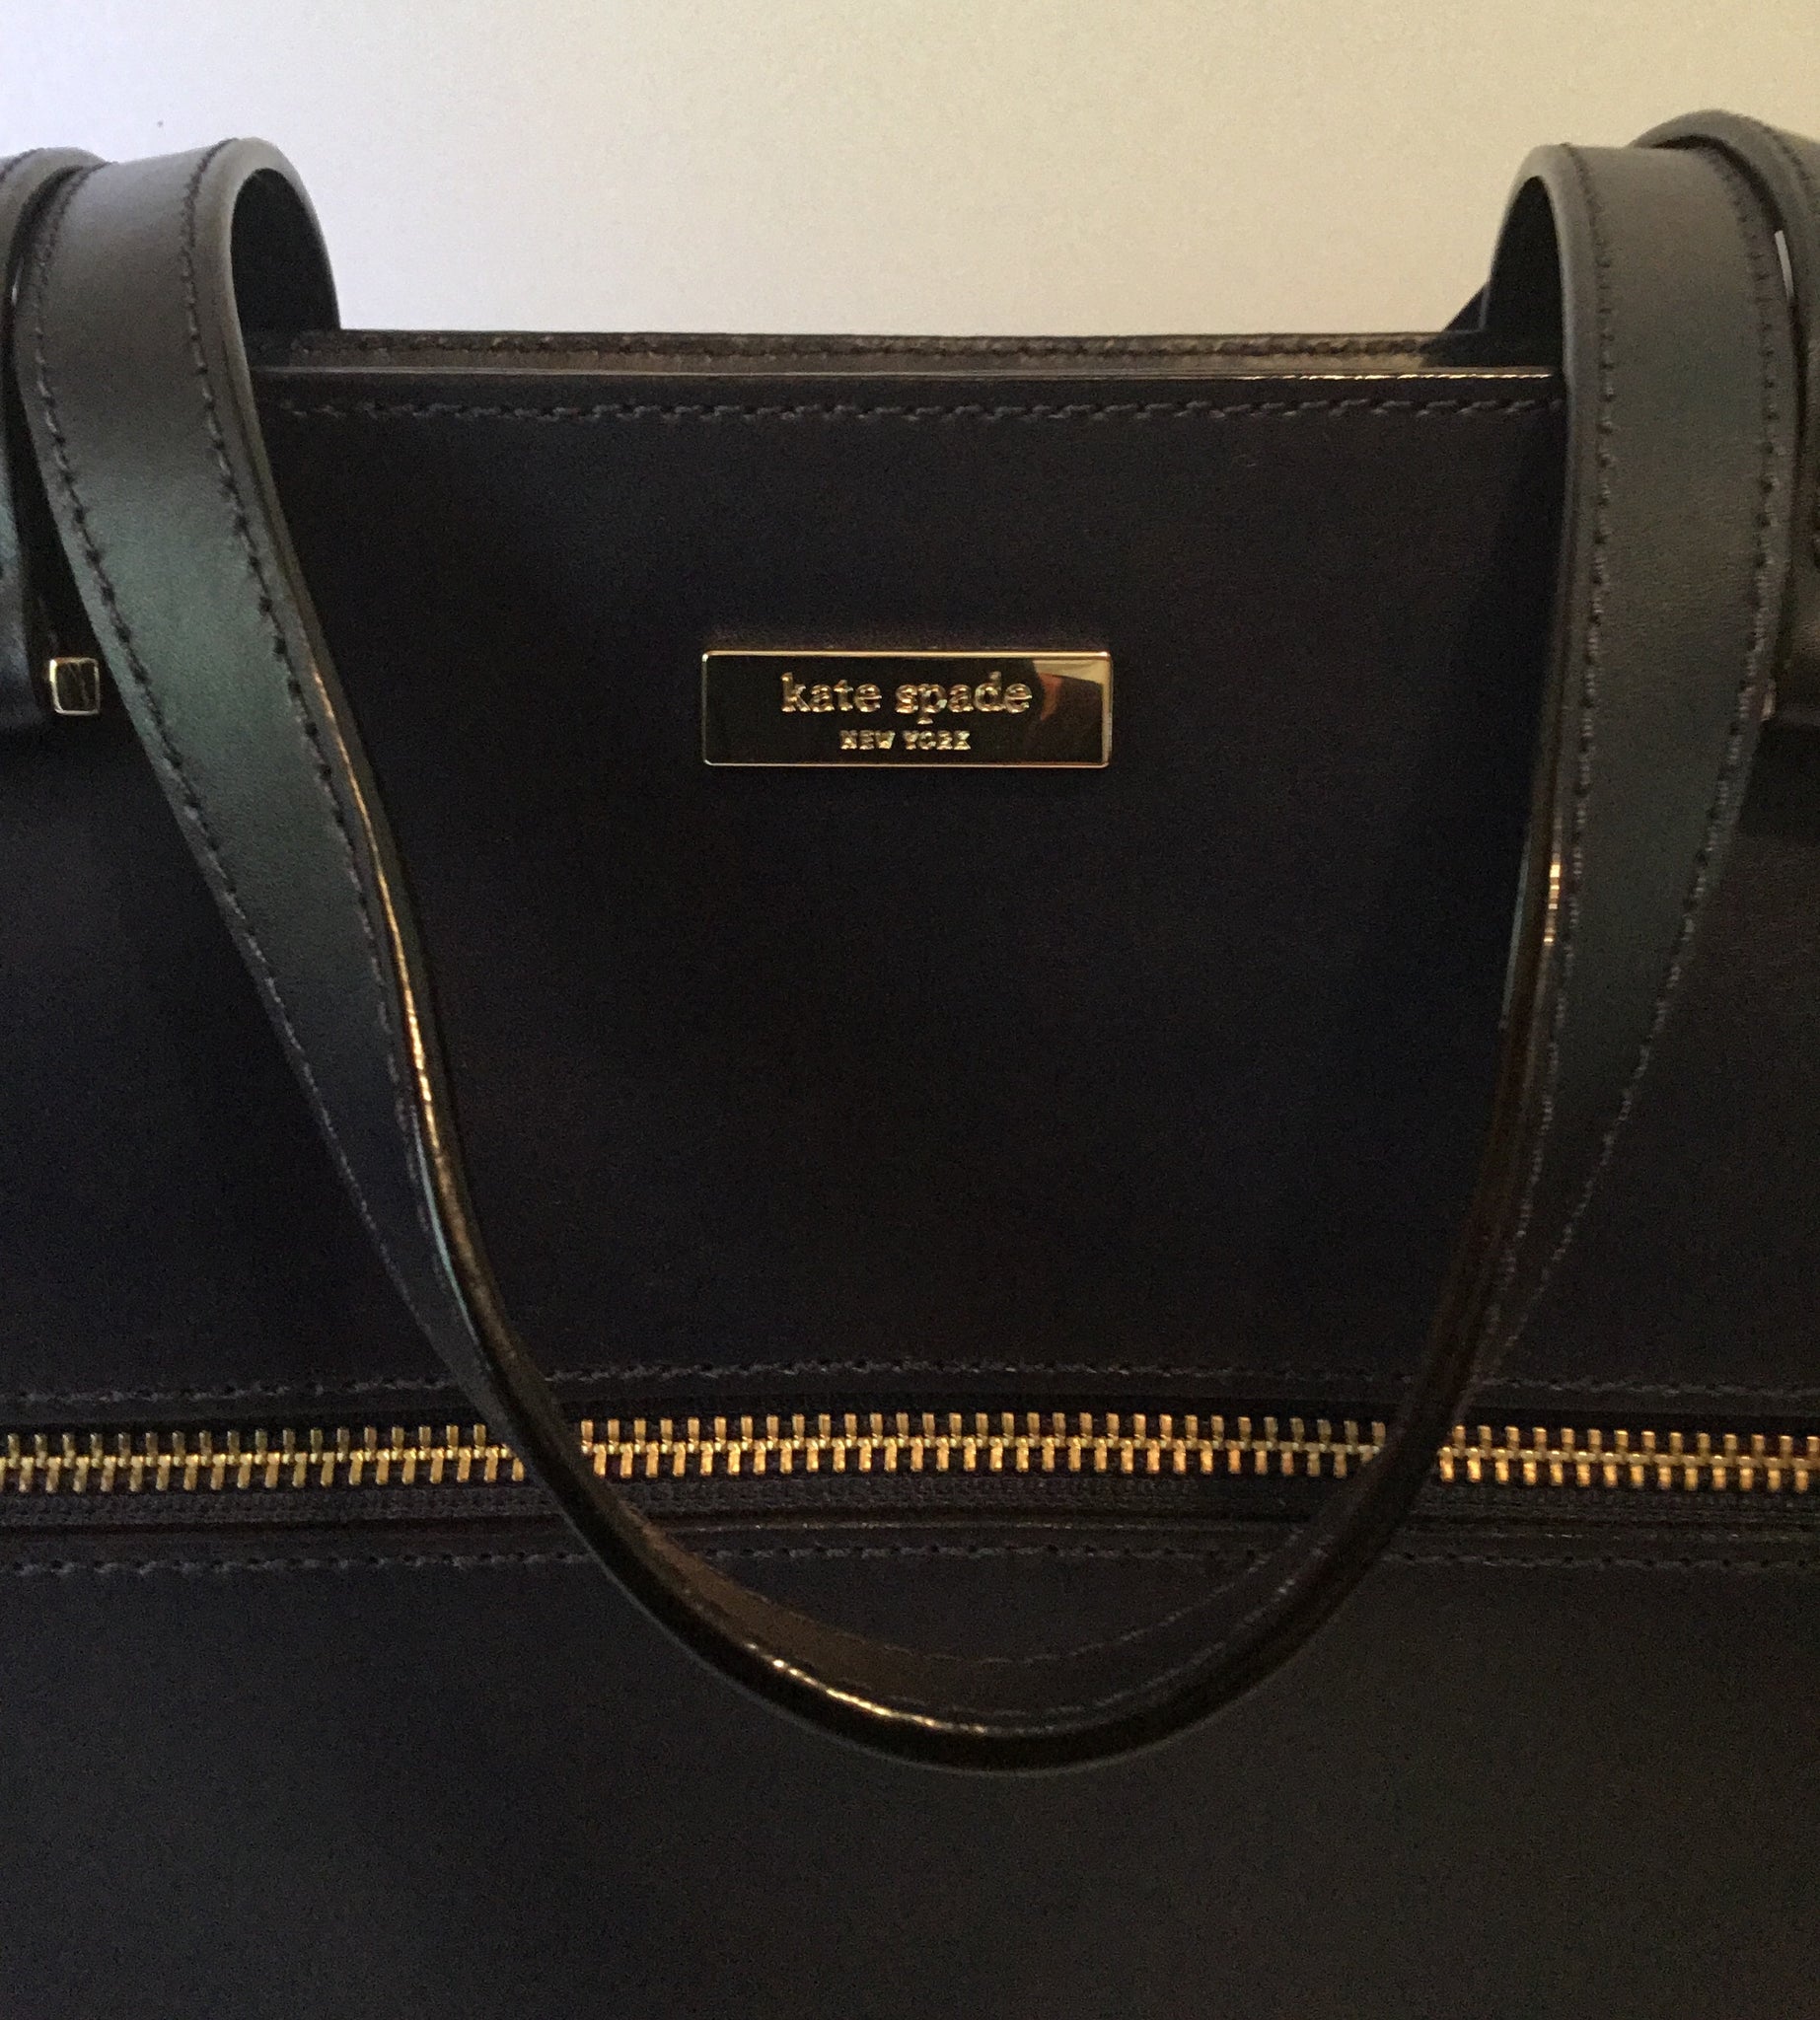 Kate Spade Smooth Brantley Bag Parliament Square Brantley Tote Purse - $65  - From Brynna